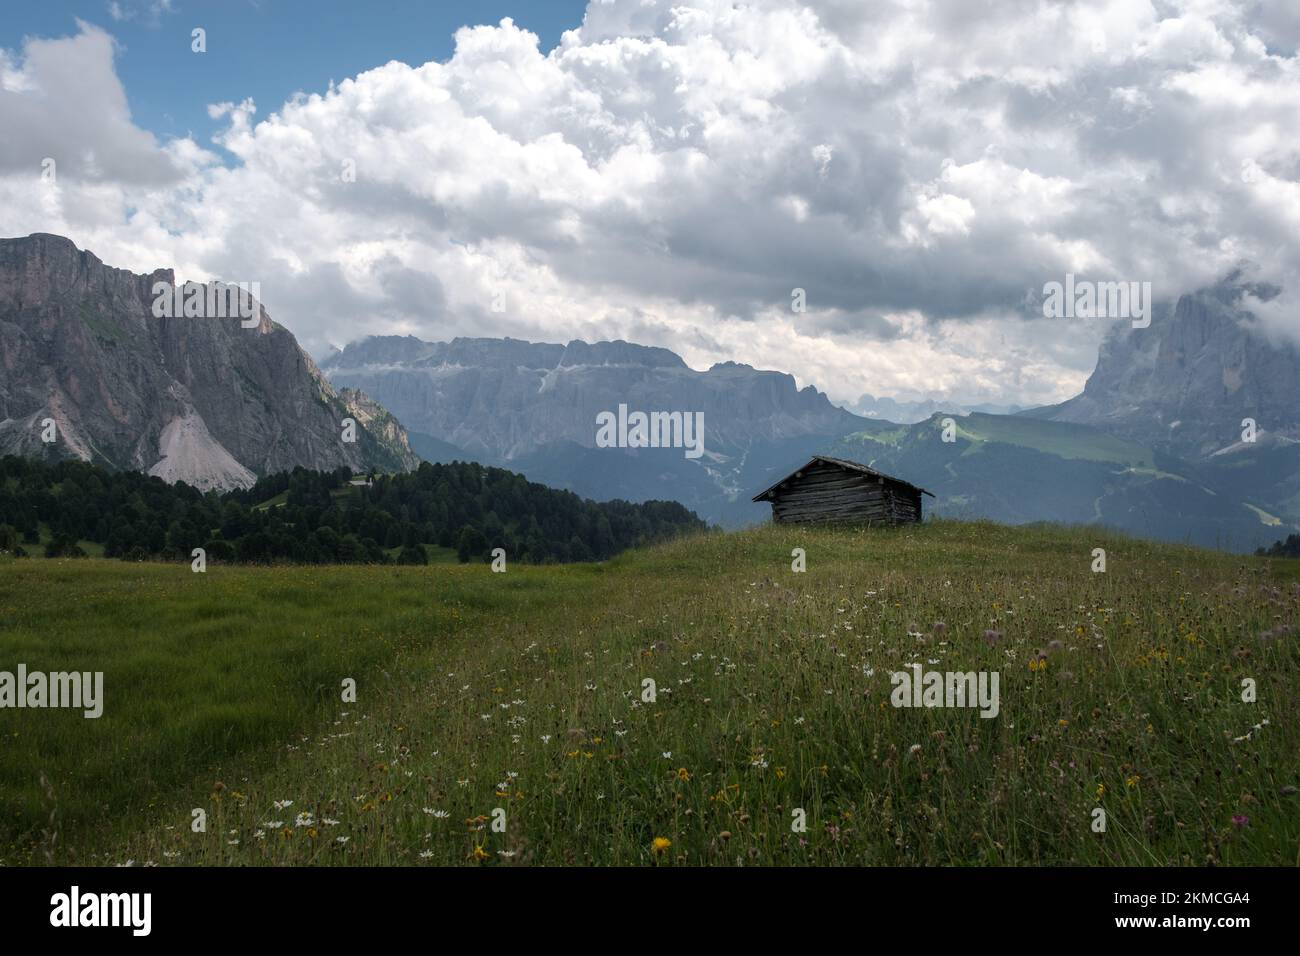 View of the Sella massif with a little cabin and mountain meadow in the foreground in south tyrol. Stock Photo